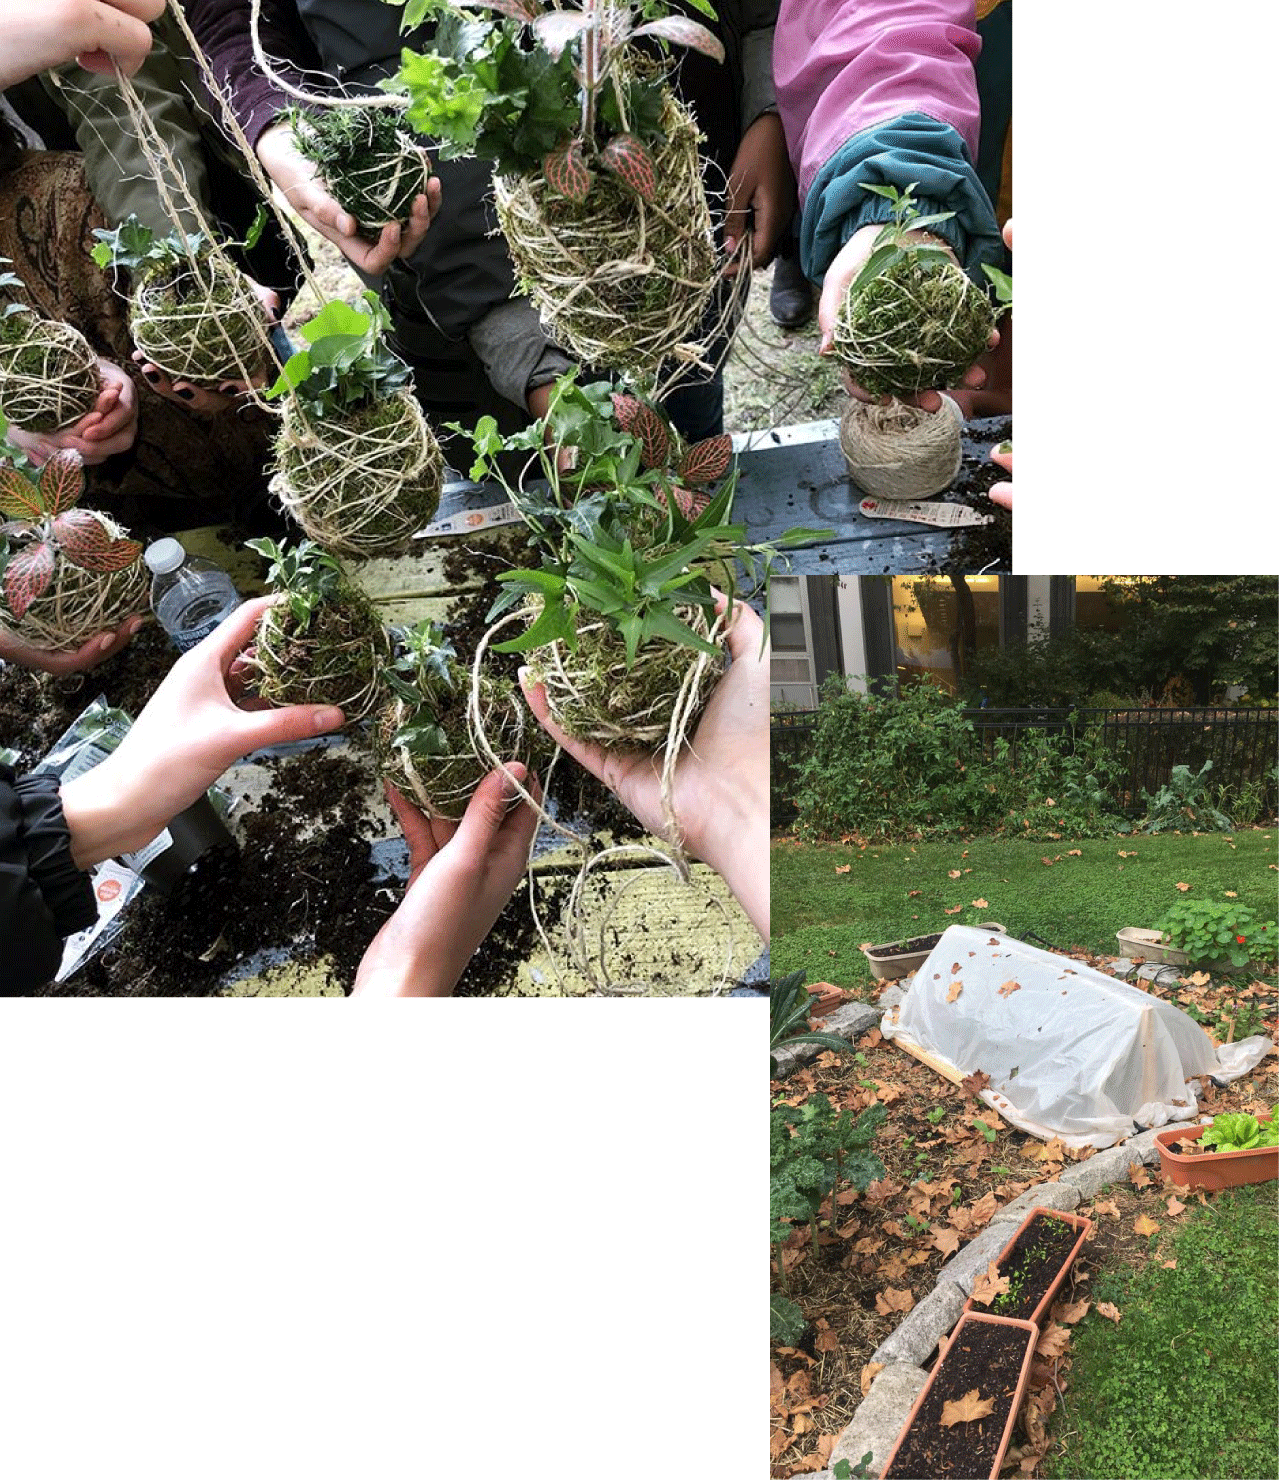 A collage: 1) Students holding their kokedamas, 2) A vegetable plan covered with a tarp in a small garden.